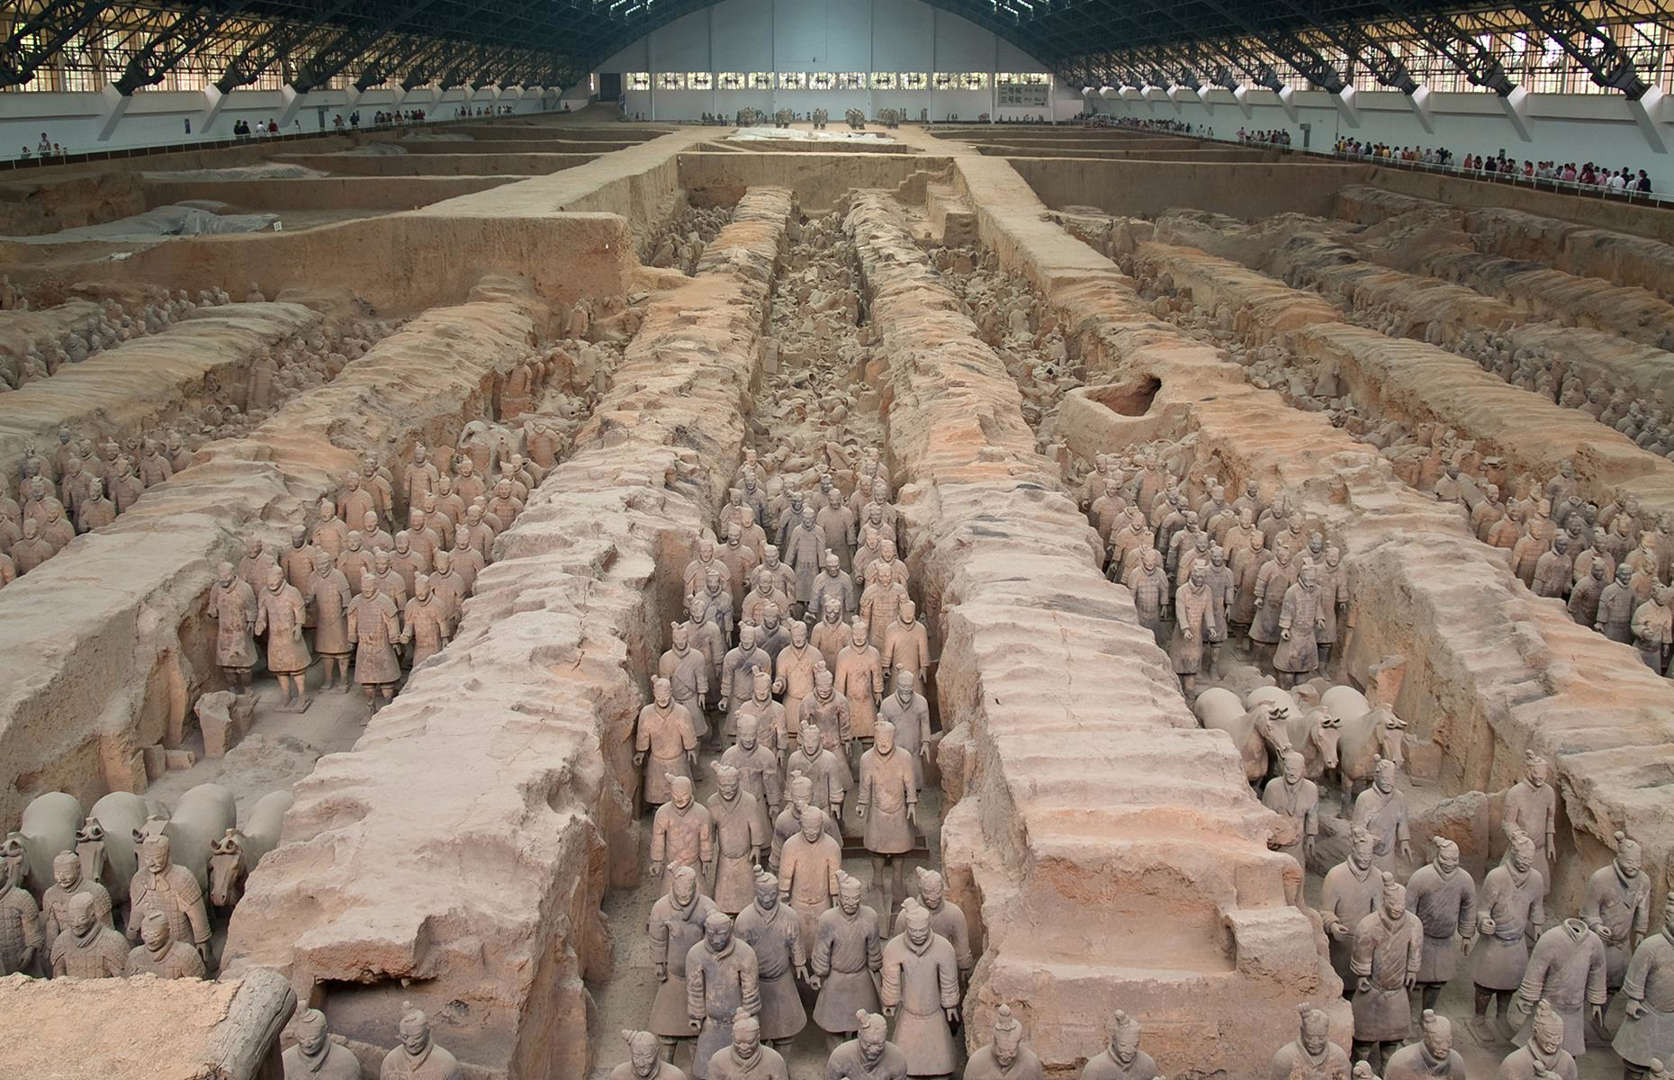 Slide 29 of 41: The figures, buried close to the mausoleum of Qin Shi Huang (founder of the Qin dynasty), are thought to date to the 3rd century BC and were likely created to protect the late emperor in the afterlife. This current-day photograph shows the site after further excavations, which revealed even more terracotta effigies. Work at the site is ongoing with archaeologists suspecting that yet more soldier-filled pits will be uncovered.